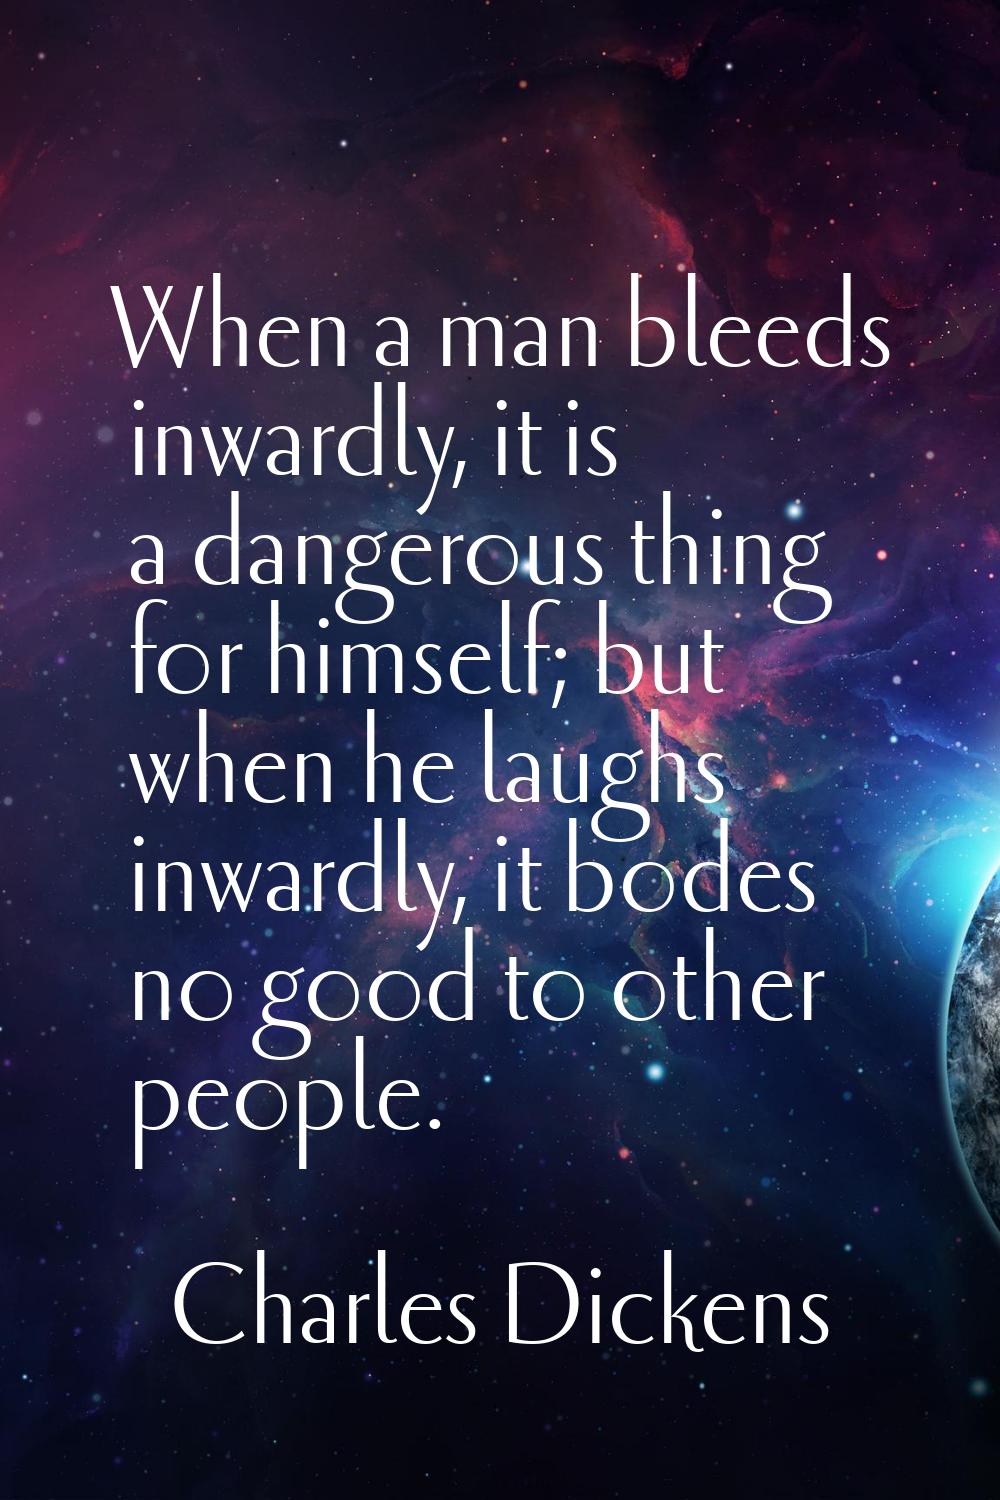 When a man bleeds inwardly, it is a dangerous thing for himself; but when he laughs inwardly, it bo